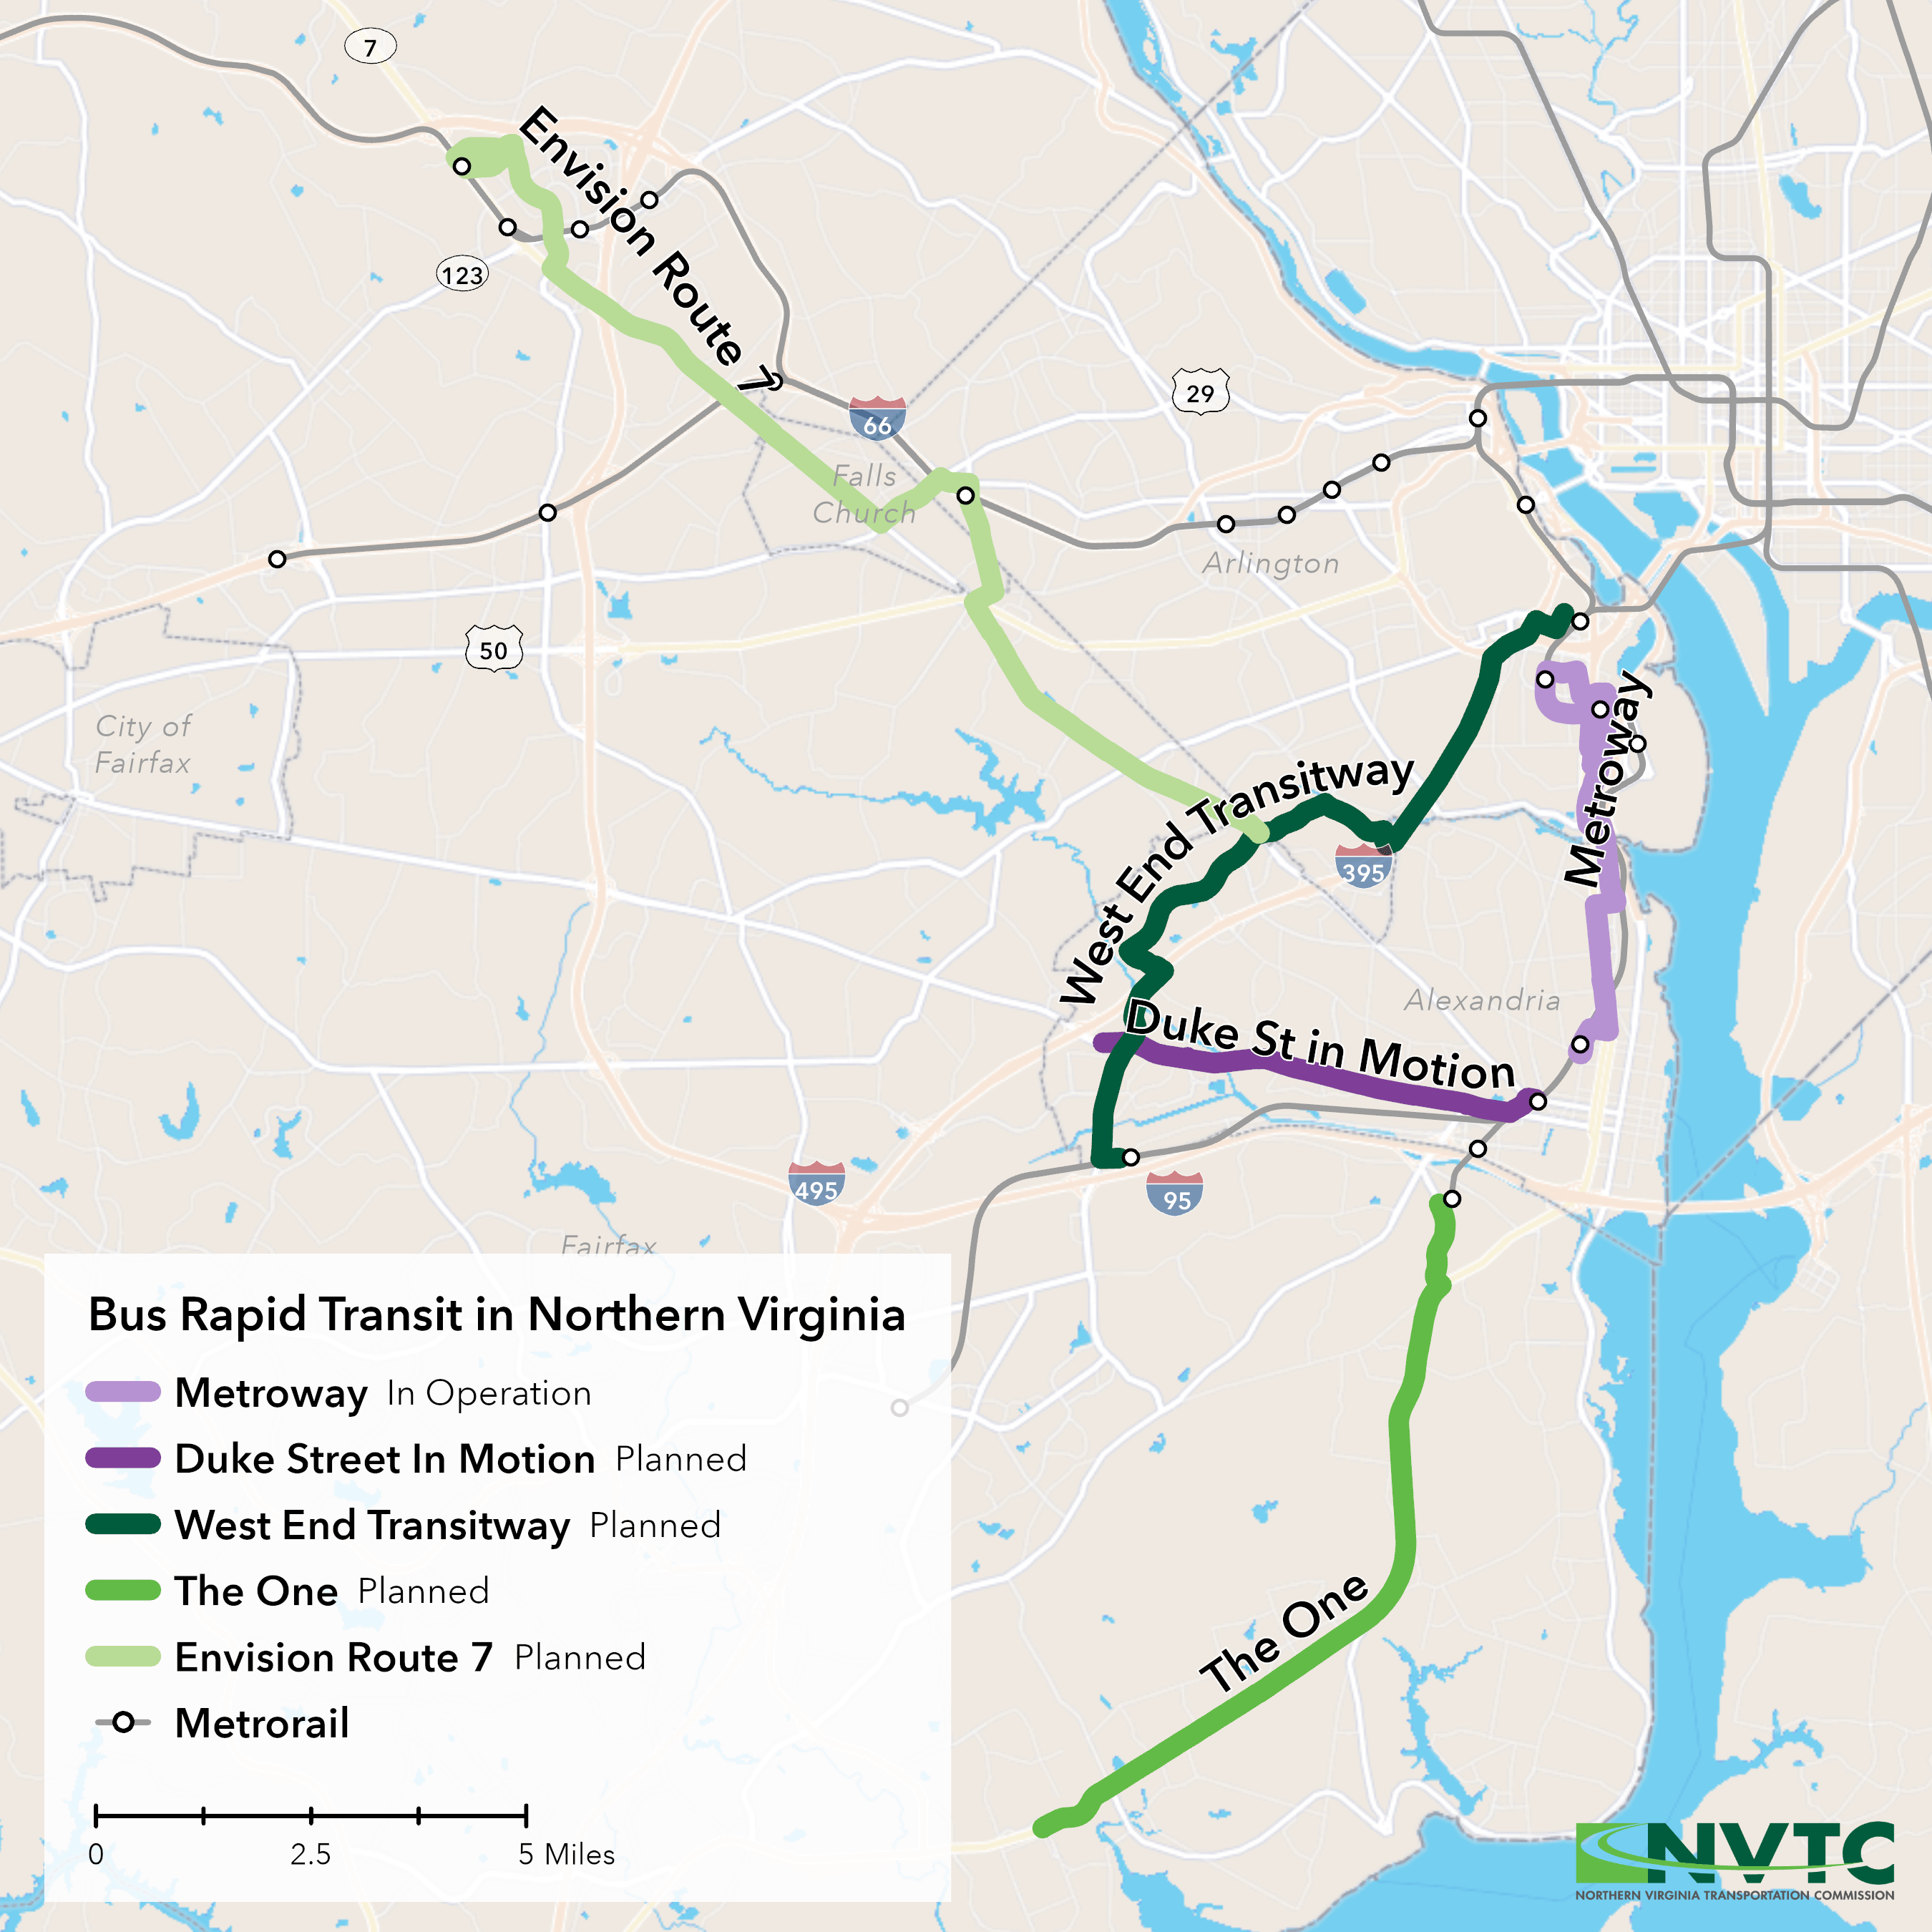 Map of current and planned bus rapid transit in Northern Virginia